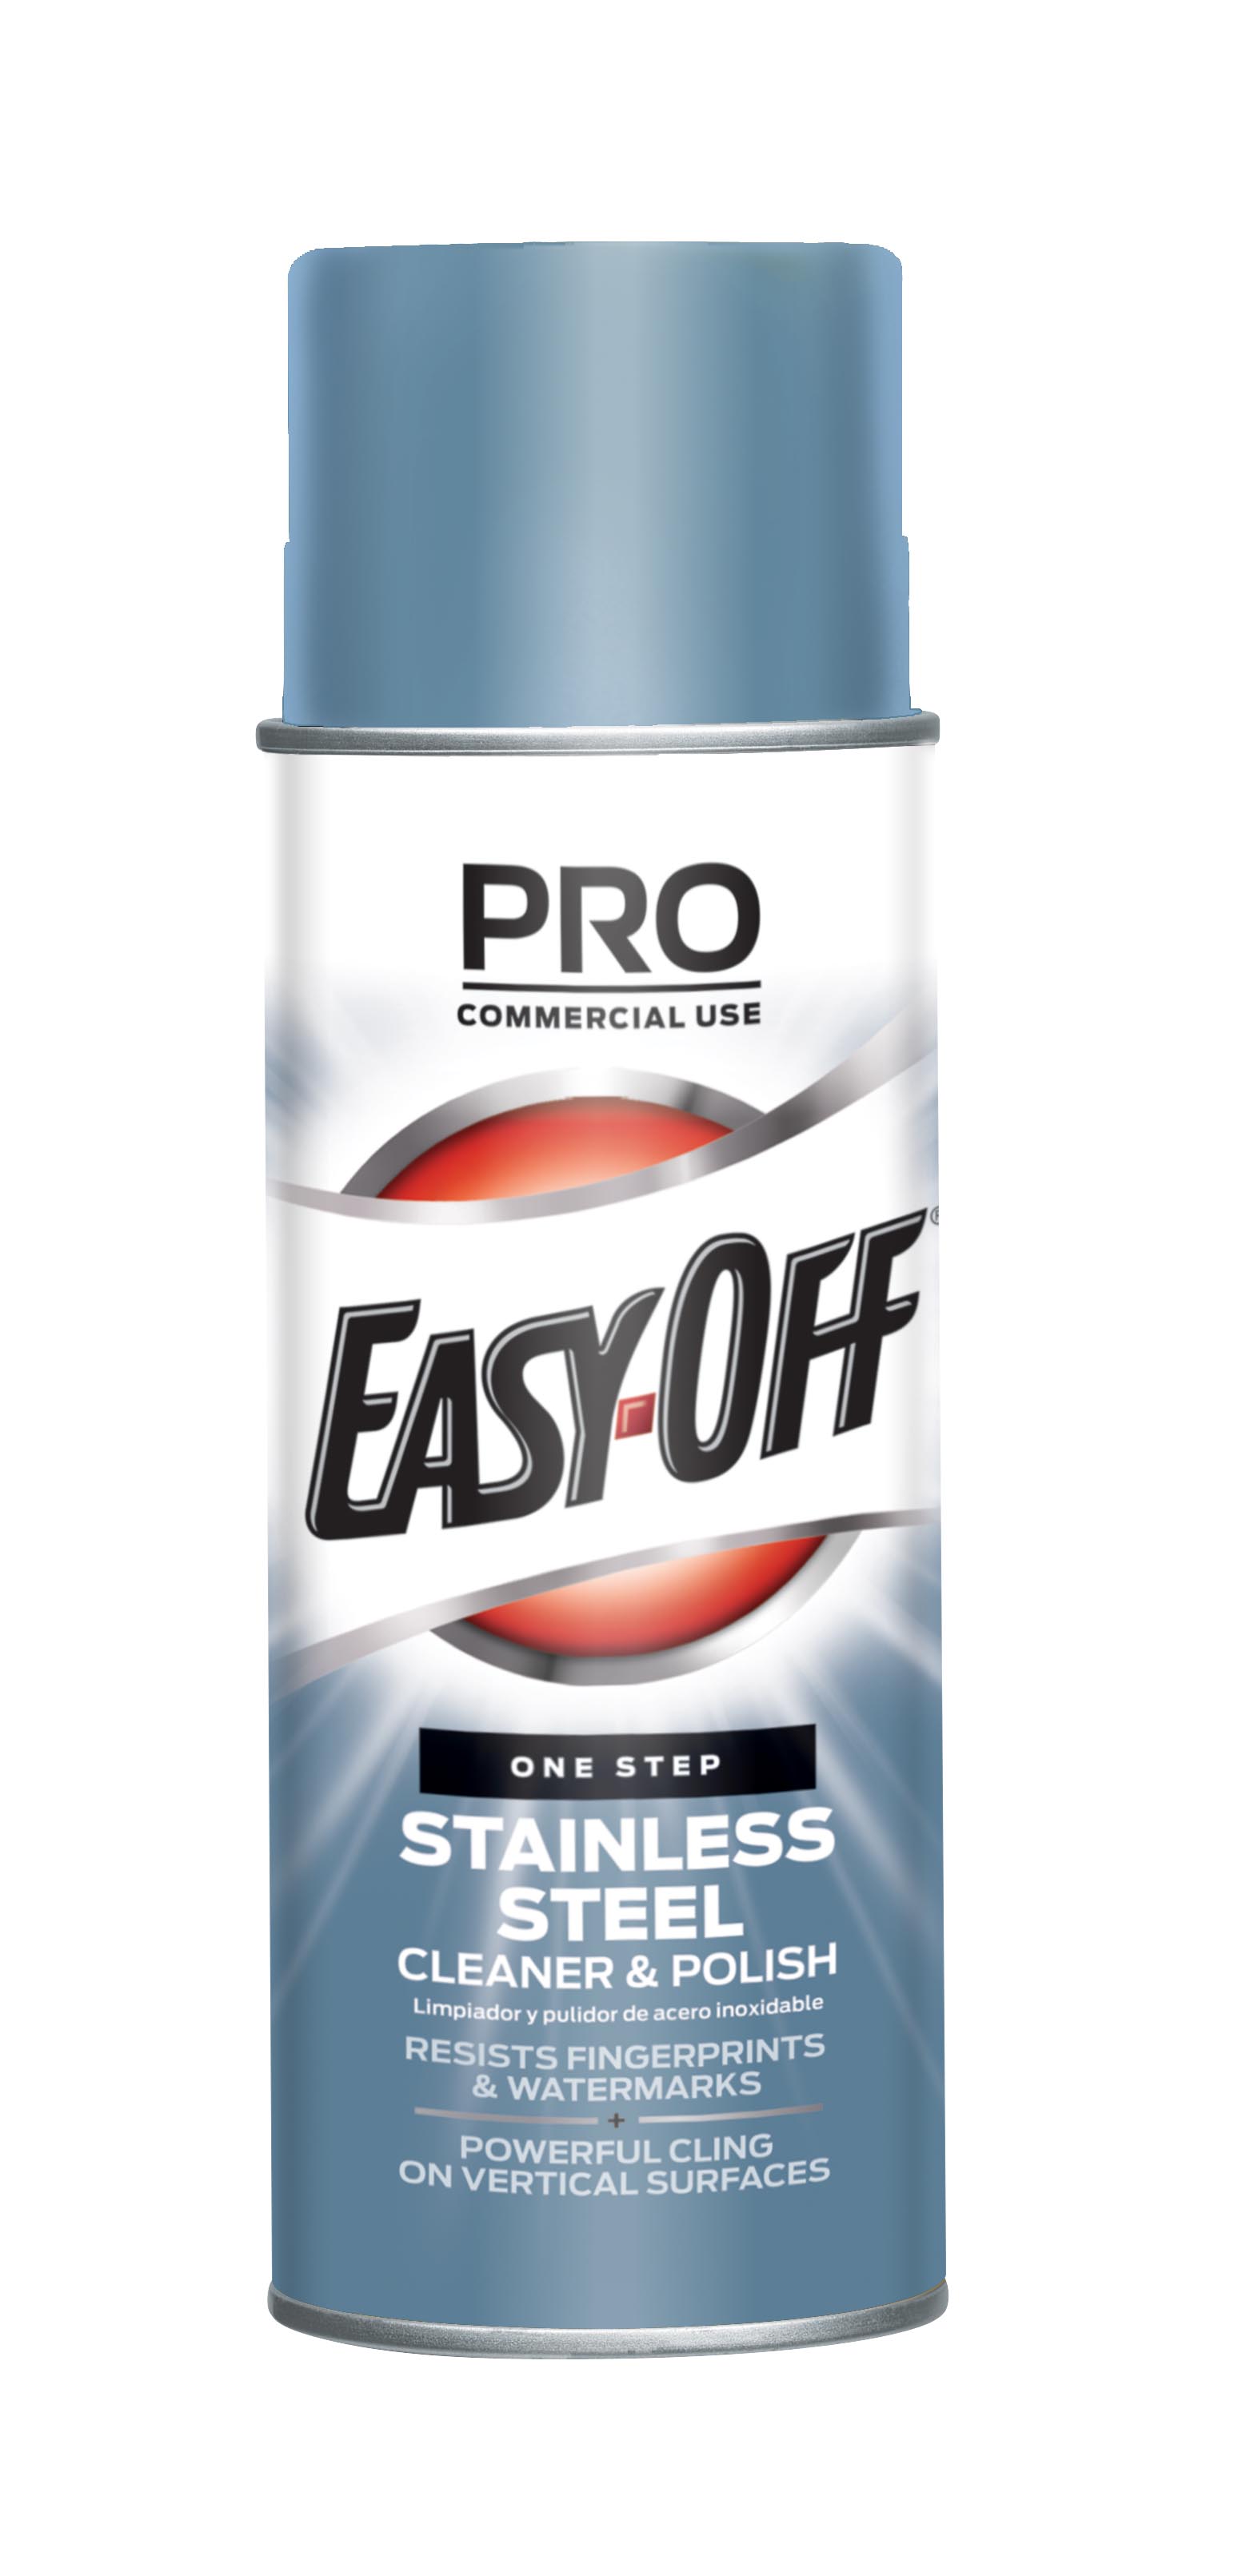 Professional EASYOFF Stainless Steel Cleaner  Polish